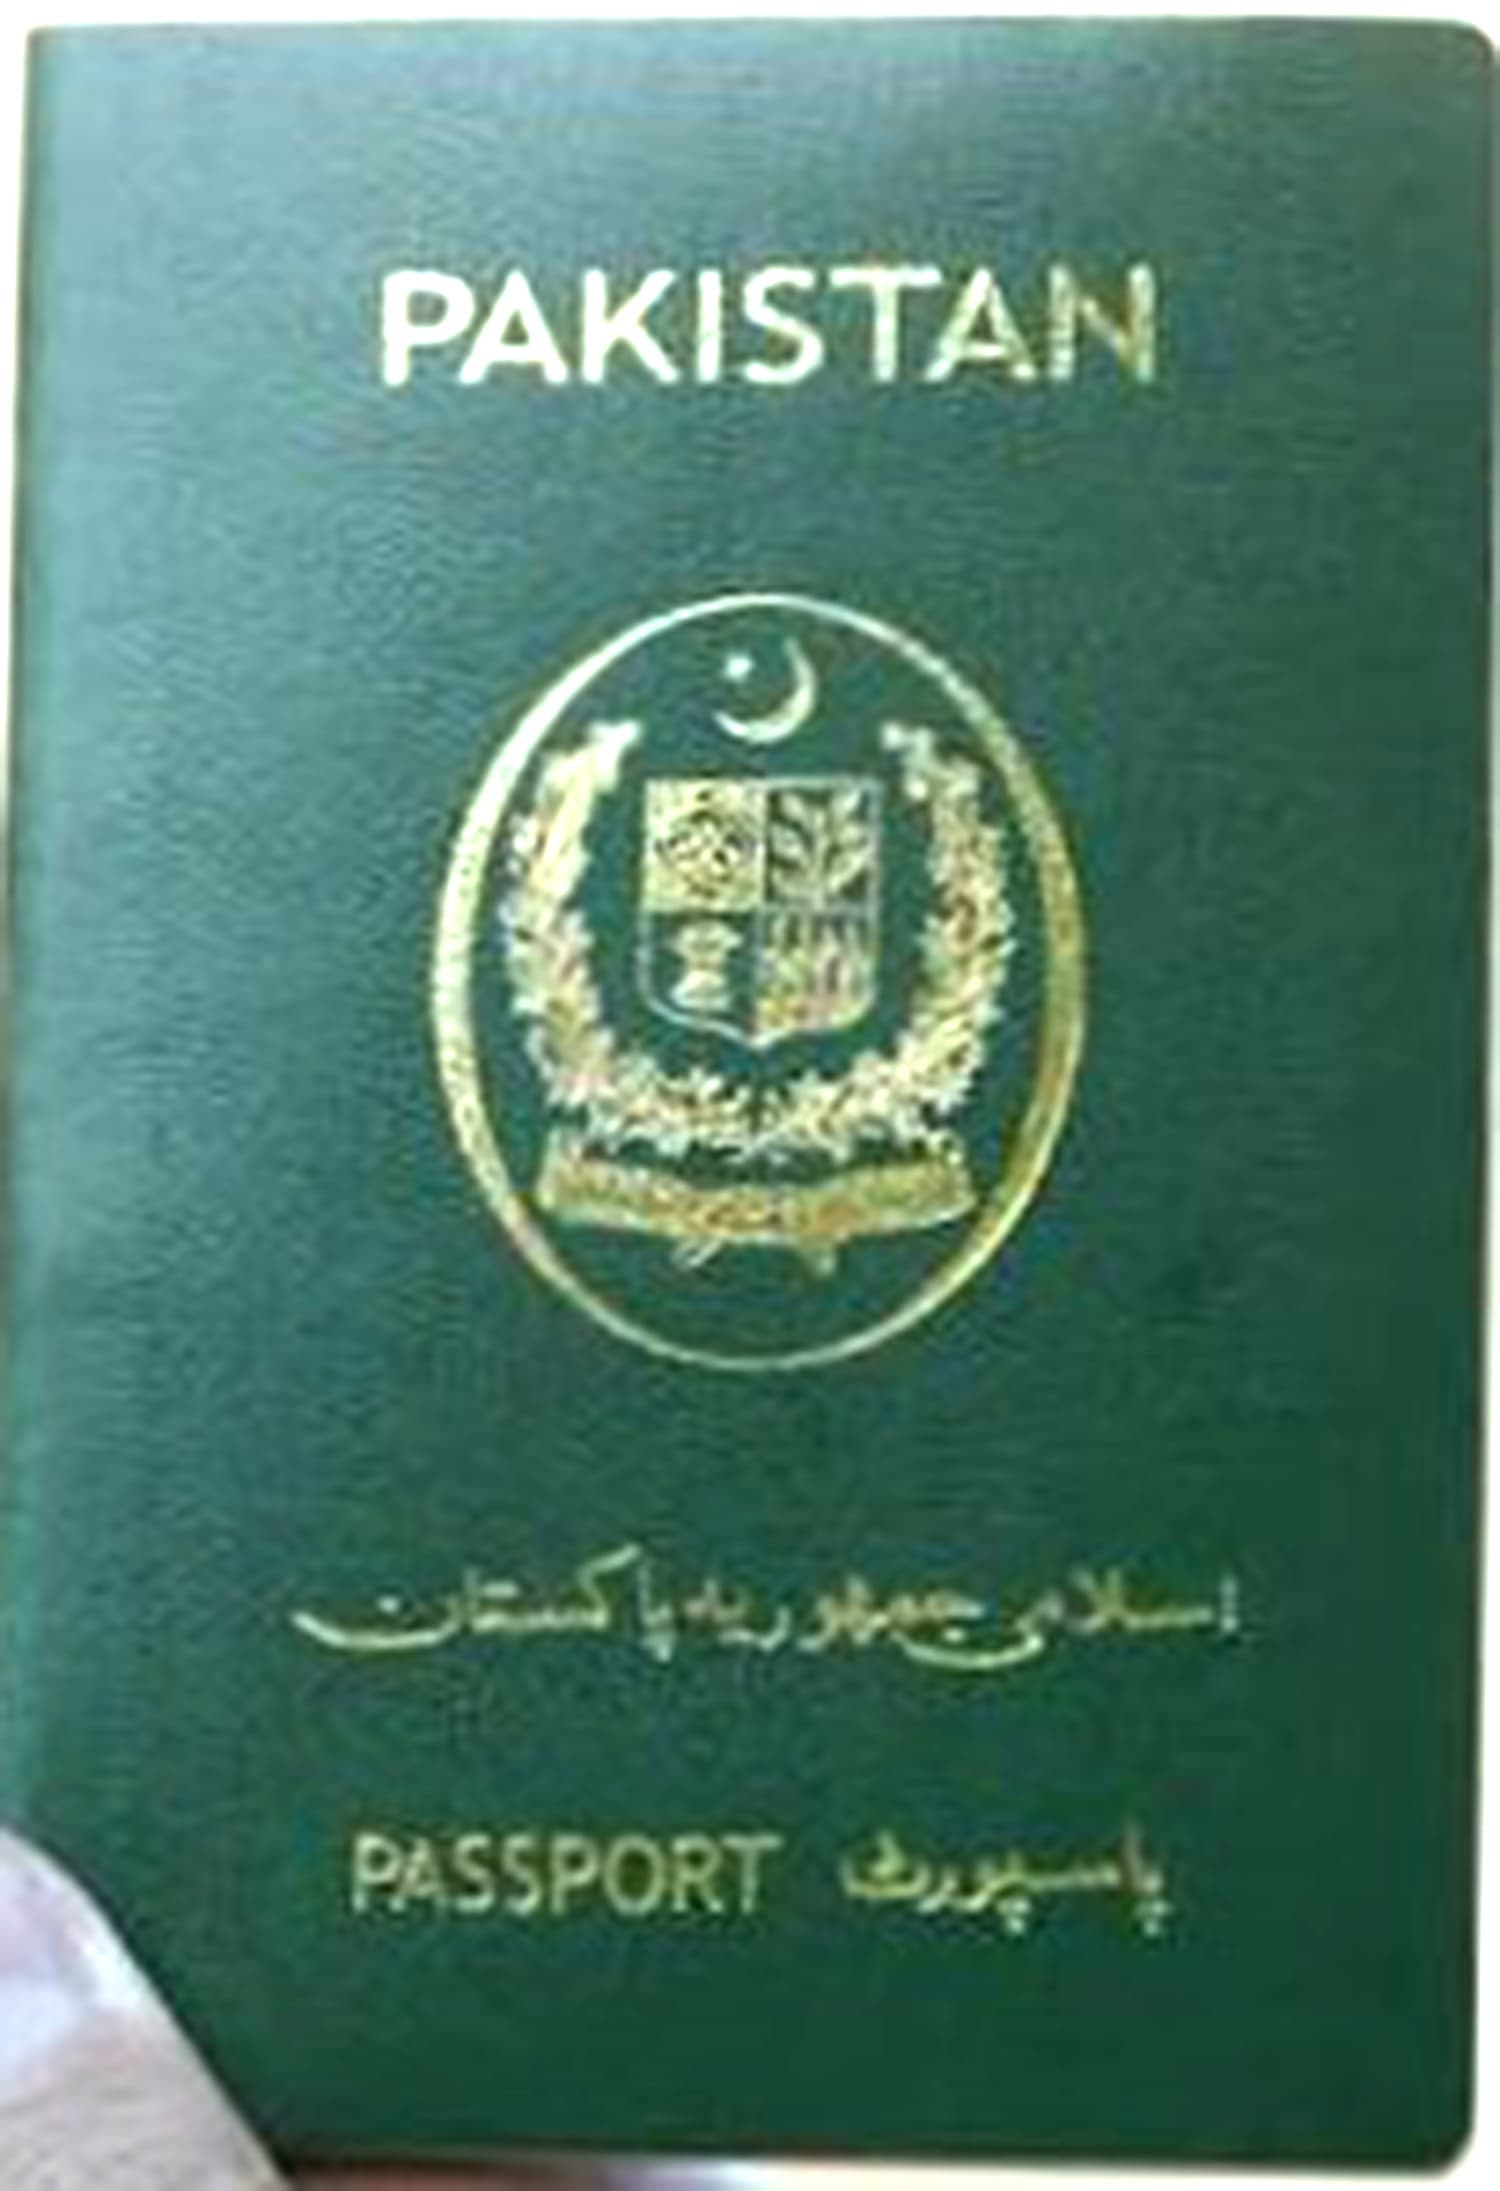 Some Pakistani embassies in European countries have started giving out this passport to dual-nationals. It says Islamic Republic in Urdu only